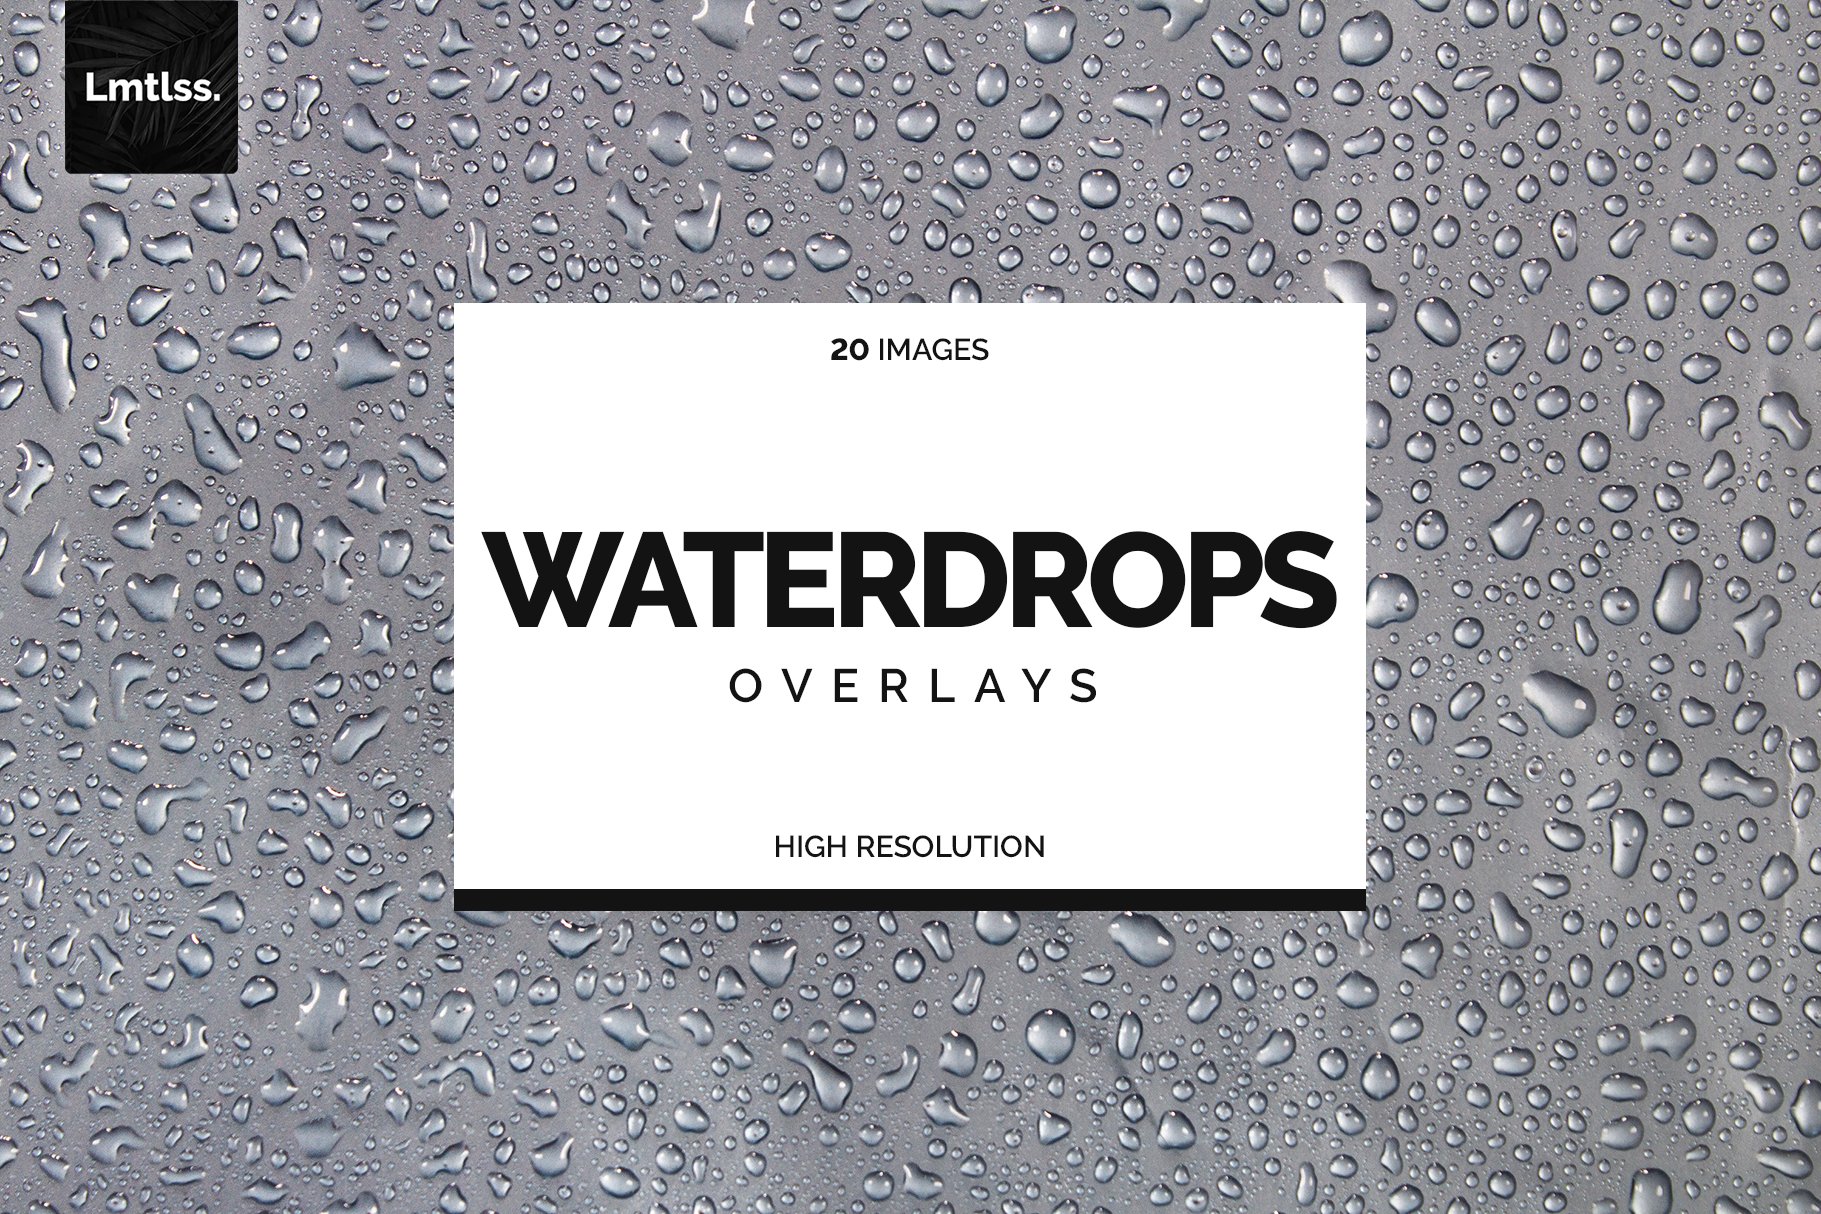 Cover image of 20 Water Drops Overlays.